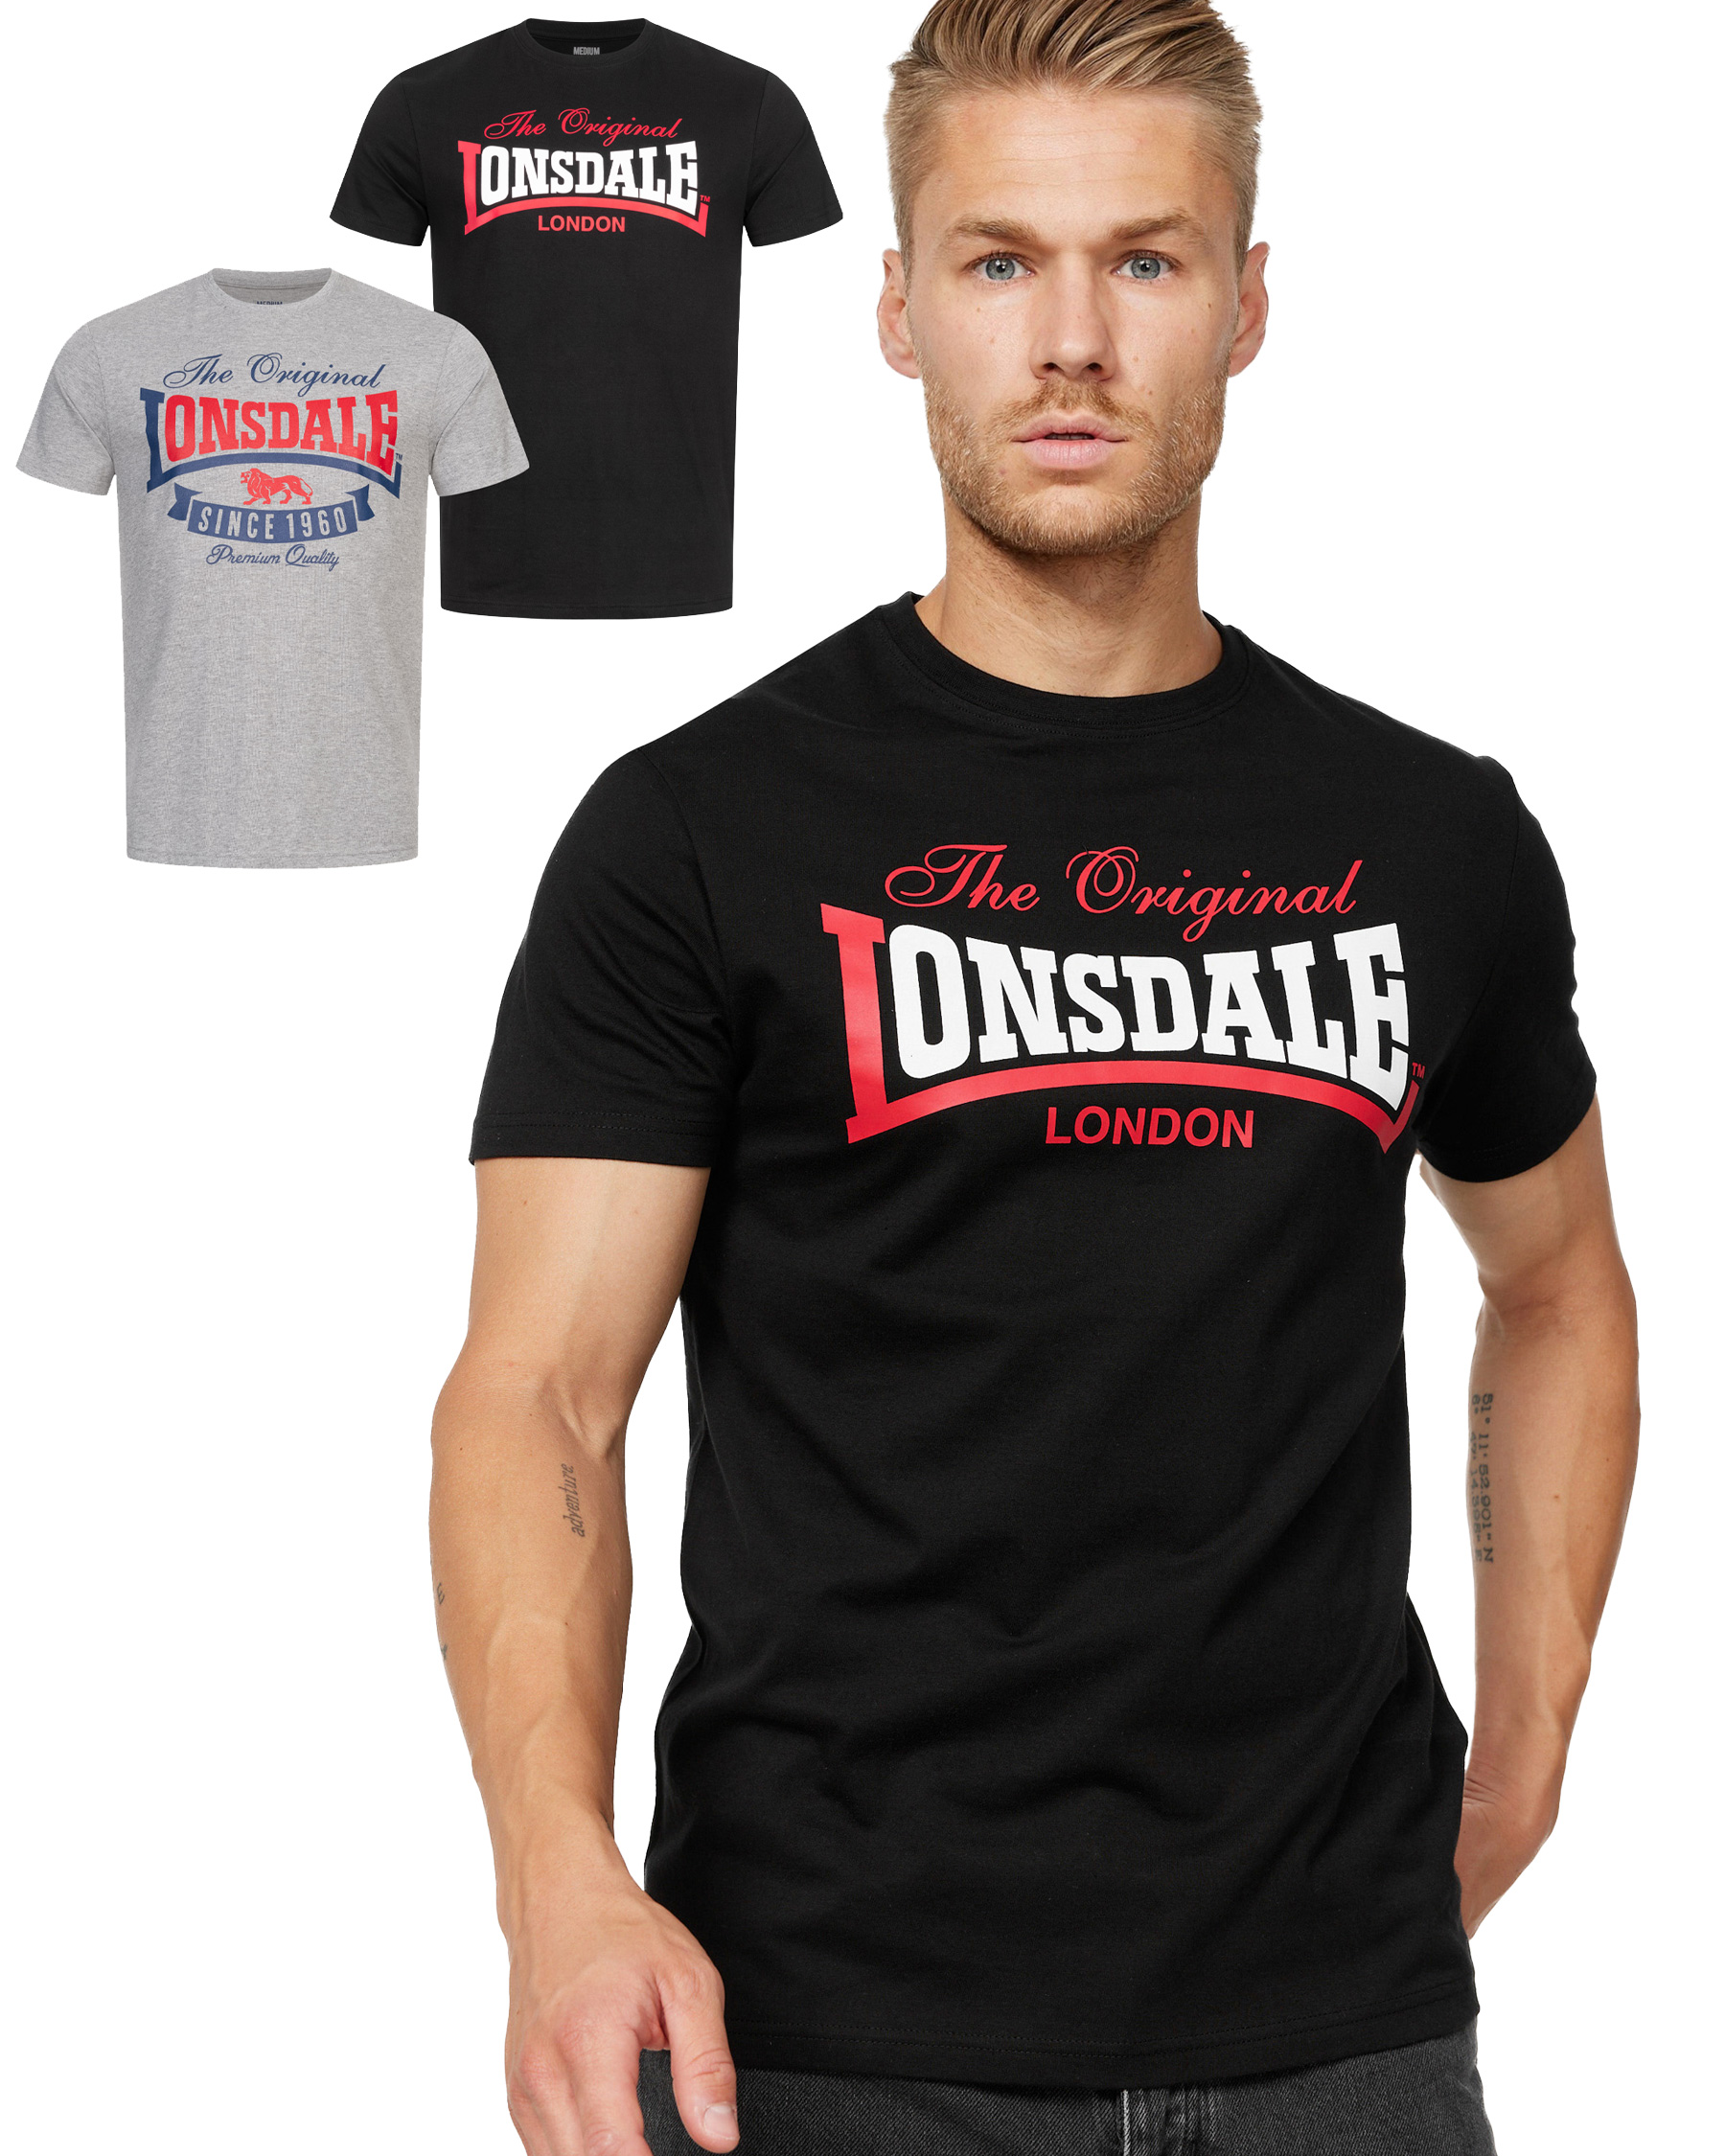 Lonsdale Doppelpack T-Shirts Gearach